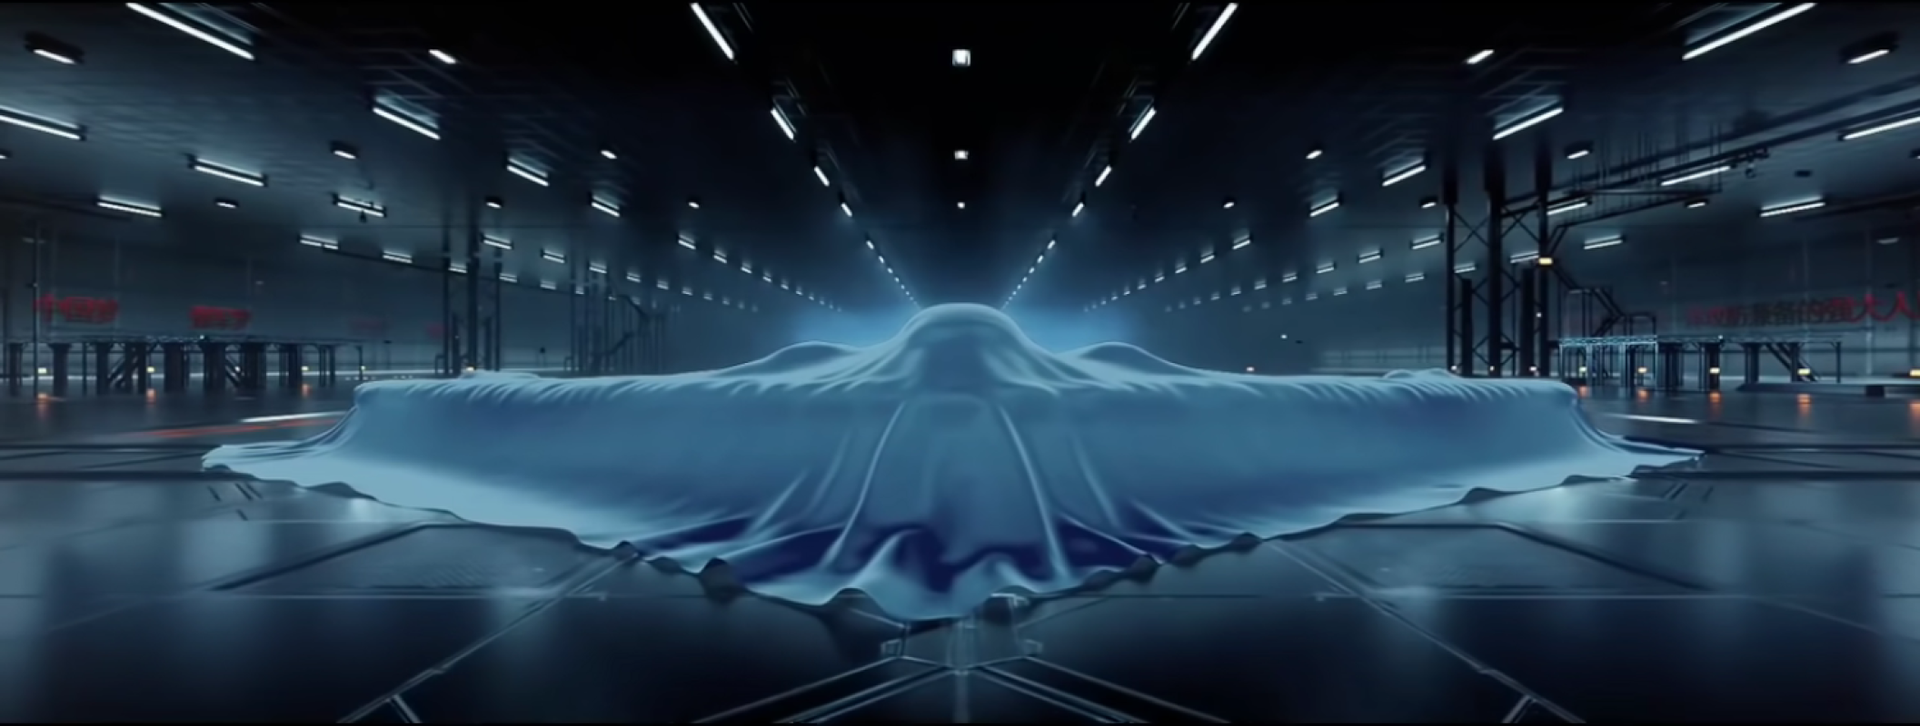 A teased image of China's forthcoming H-20 stealth bomber taken from a People's Liberation Army Air Force promotional video - Sputnik International, 1920, 02.12.2022